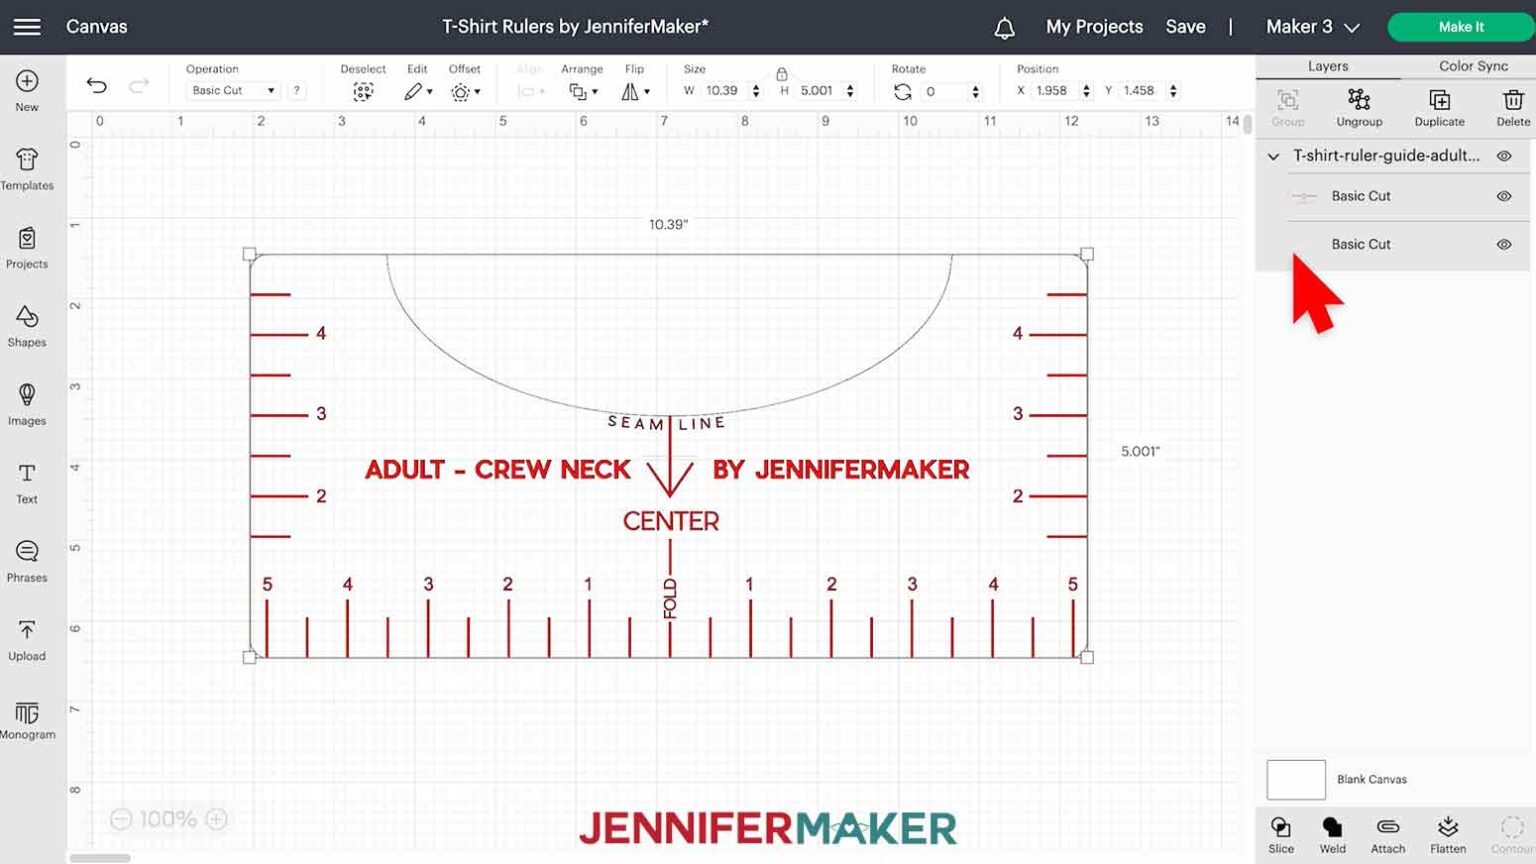 t-shirt-ruler-guide-how-to-get-perfect-placement-jennifer-maker